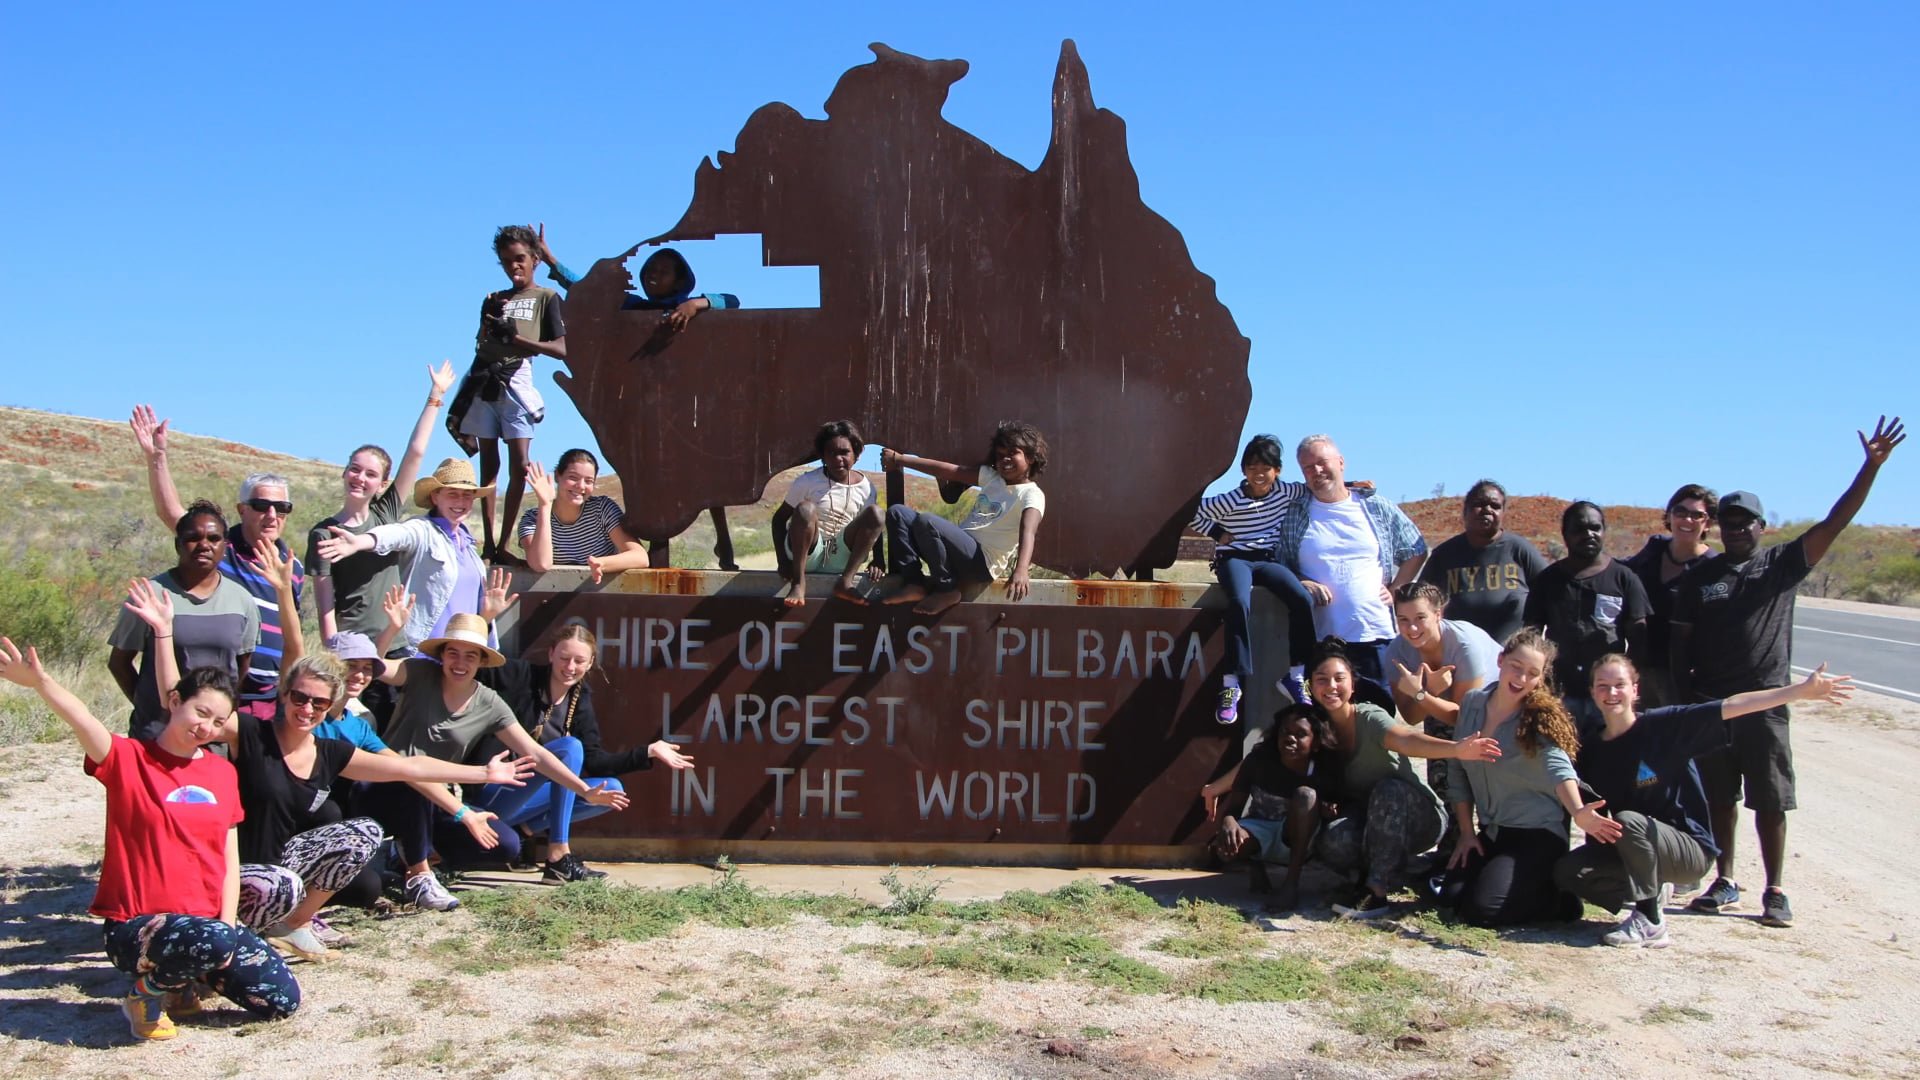 Group Waving to the Camera by the Large East Pilbara Shire Signage